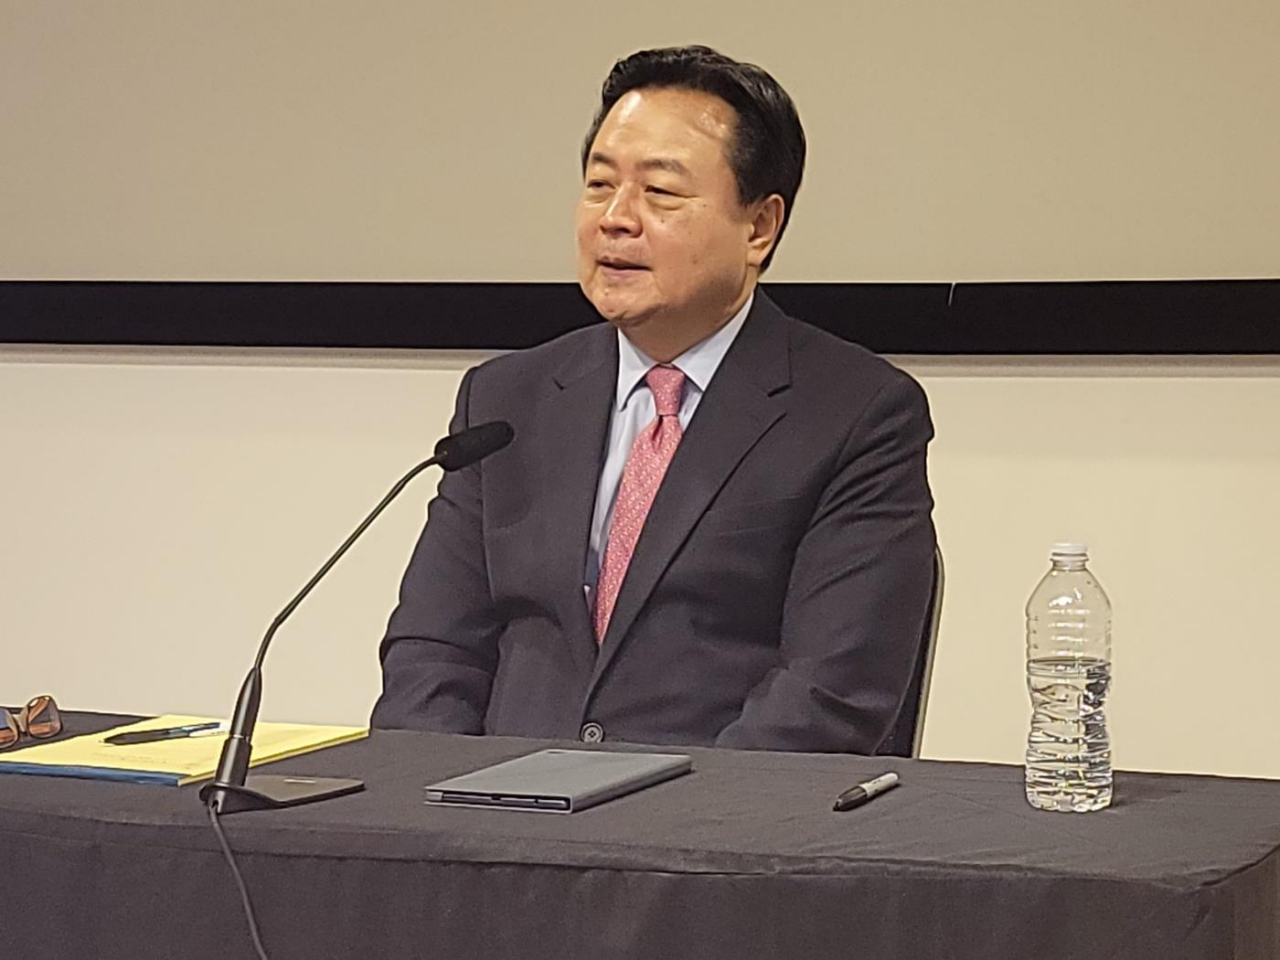 South Korean Ambassador to the United States Cho Hyun-dong speaks during a press briefing in Washington on Tuesday. (Yonhap)